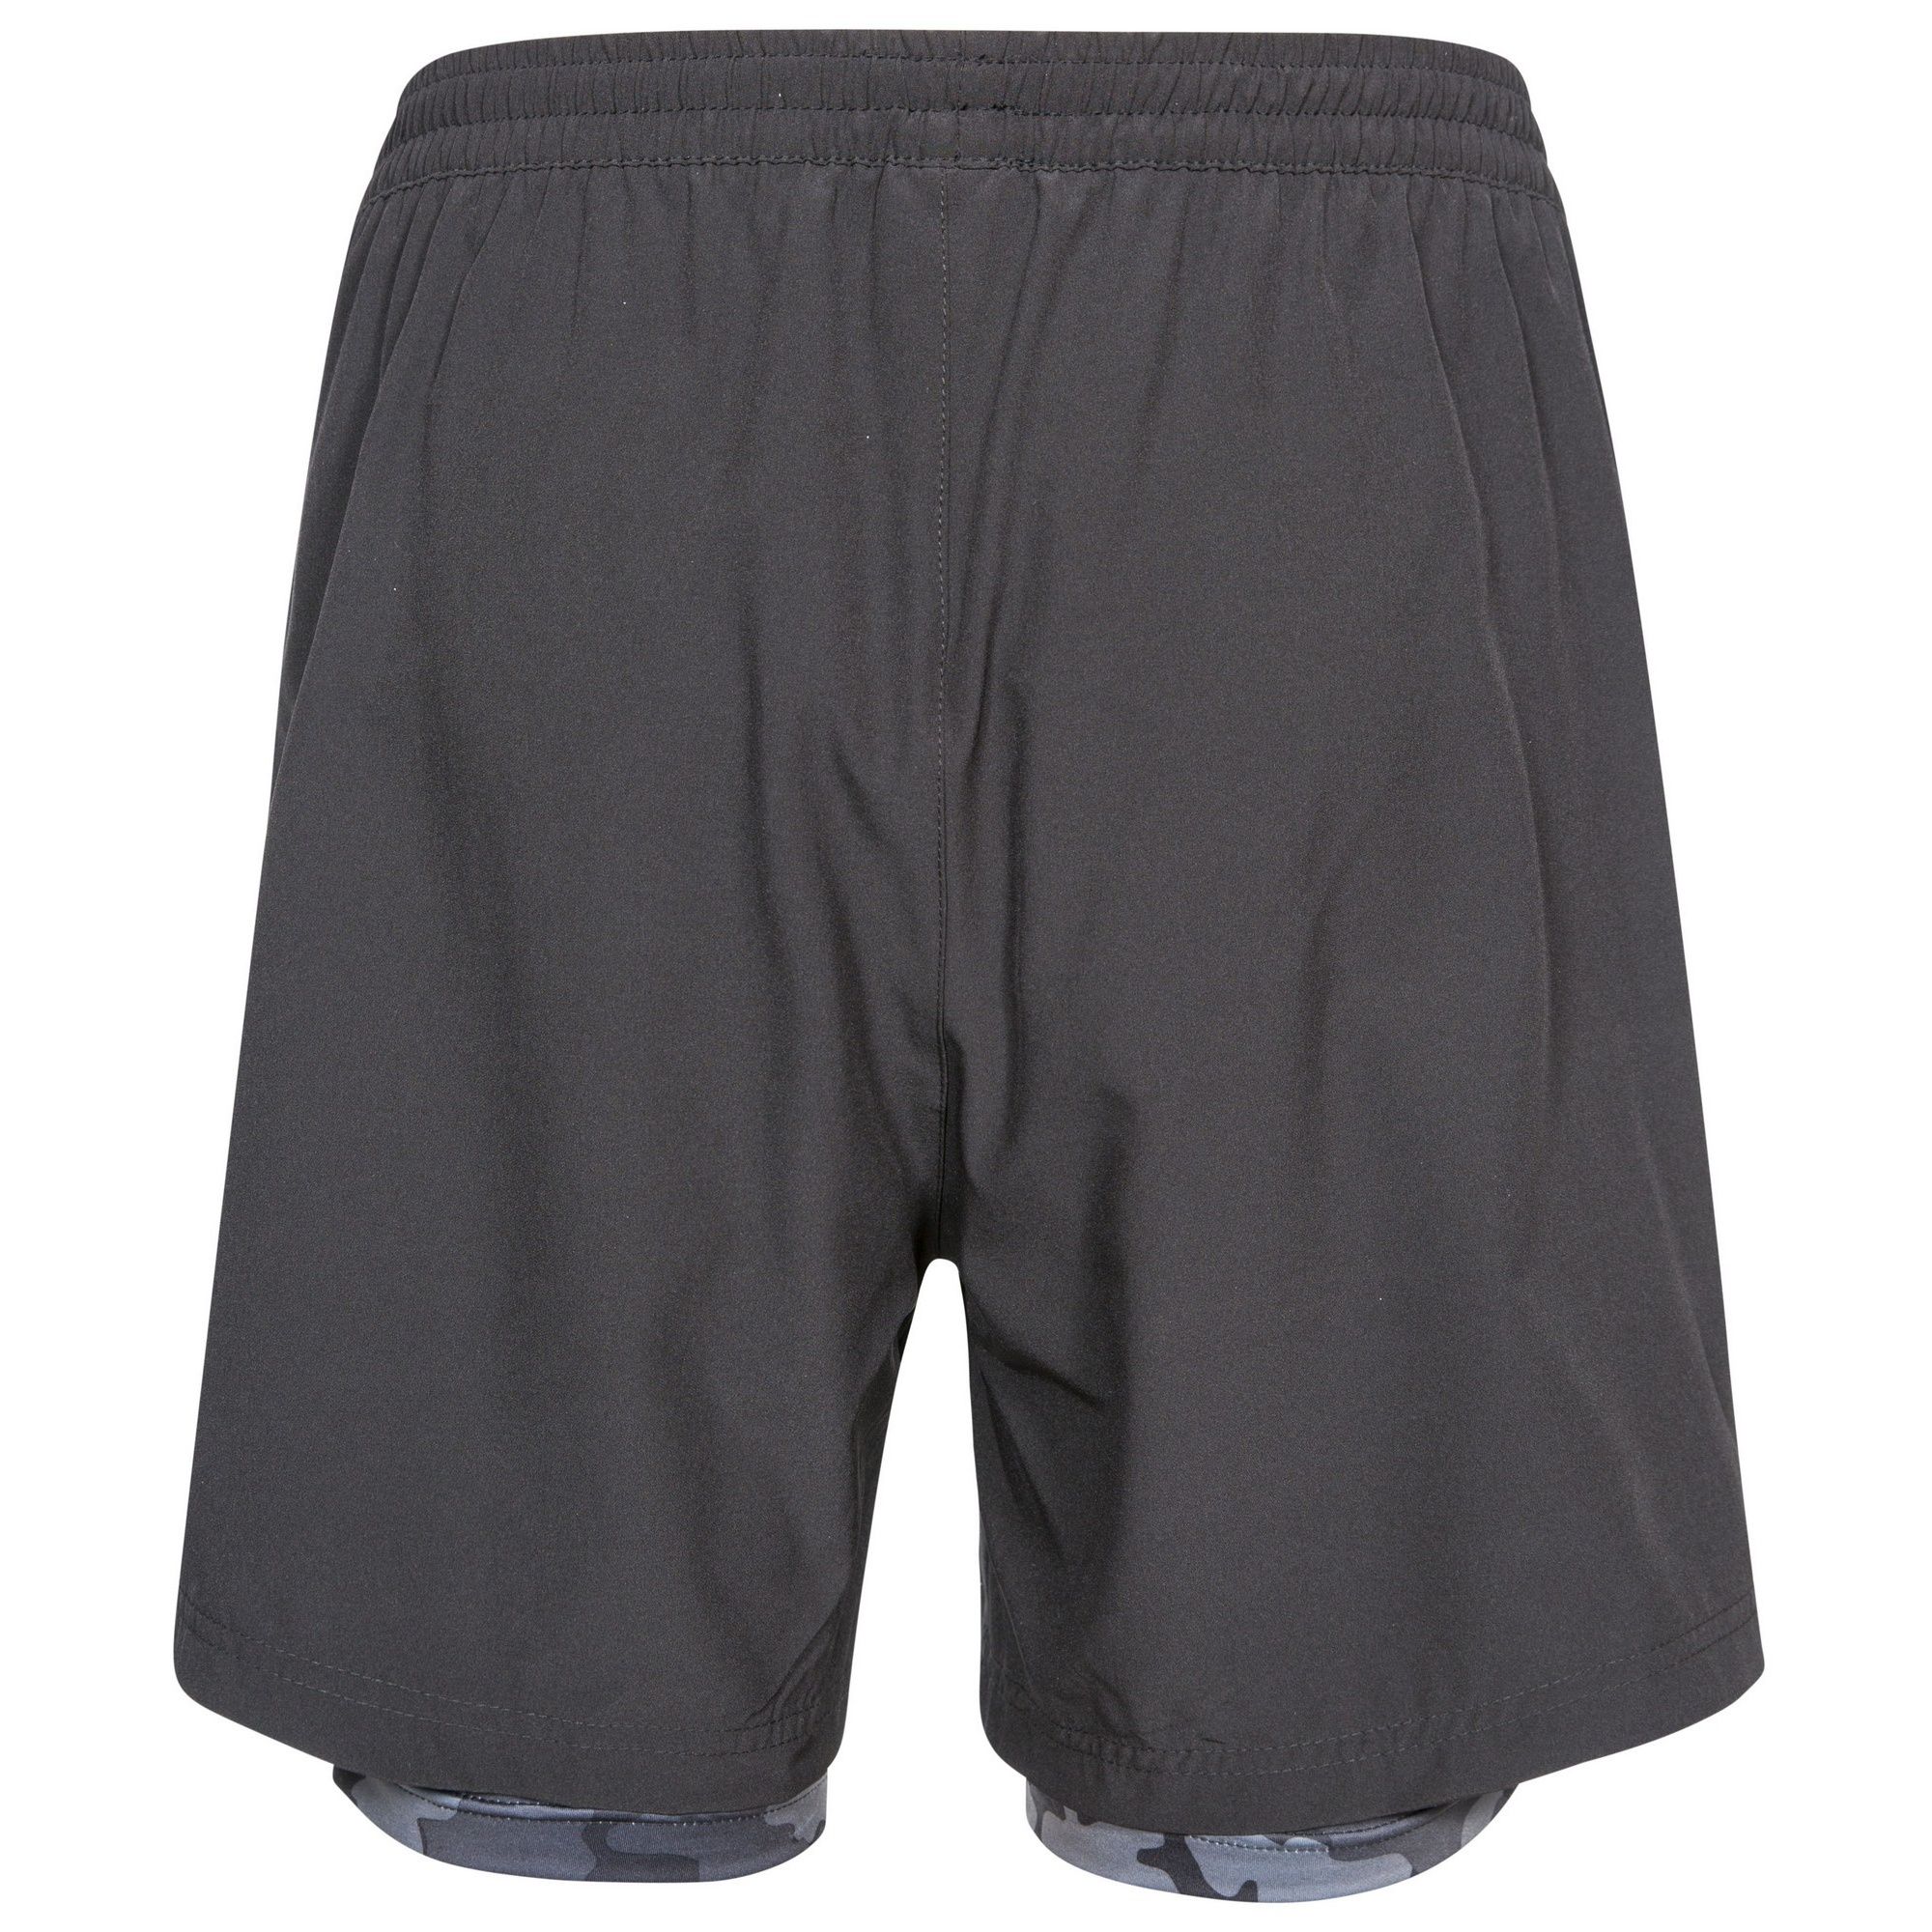 Active shorts with inner drawcord at waist. Zip pocket. Reflective logos. Wicking. Quick dry. 90% polyester, 10% elastane. Trespass Mens Waist Sizing (approx): S - 32in/81cm, M - 34in/86cm, L - 36in/91.5cm, XL - 38in/96.5cm, XXL - 40in/101.5cm, XXXL - 42in/106.5cm.